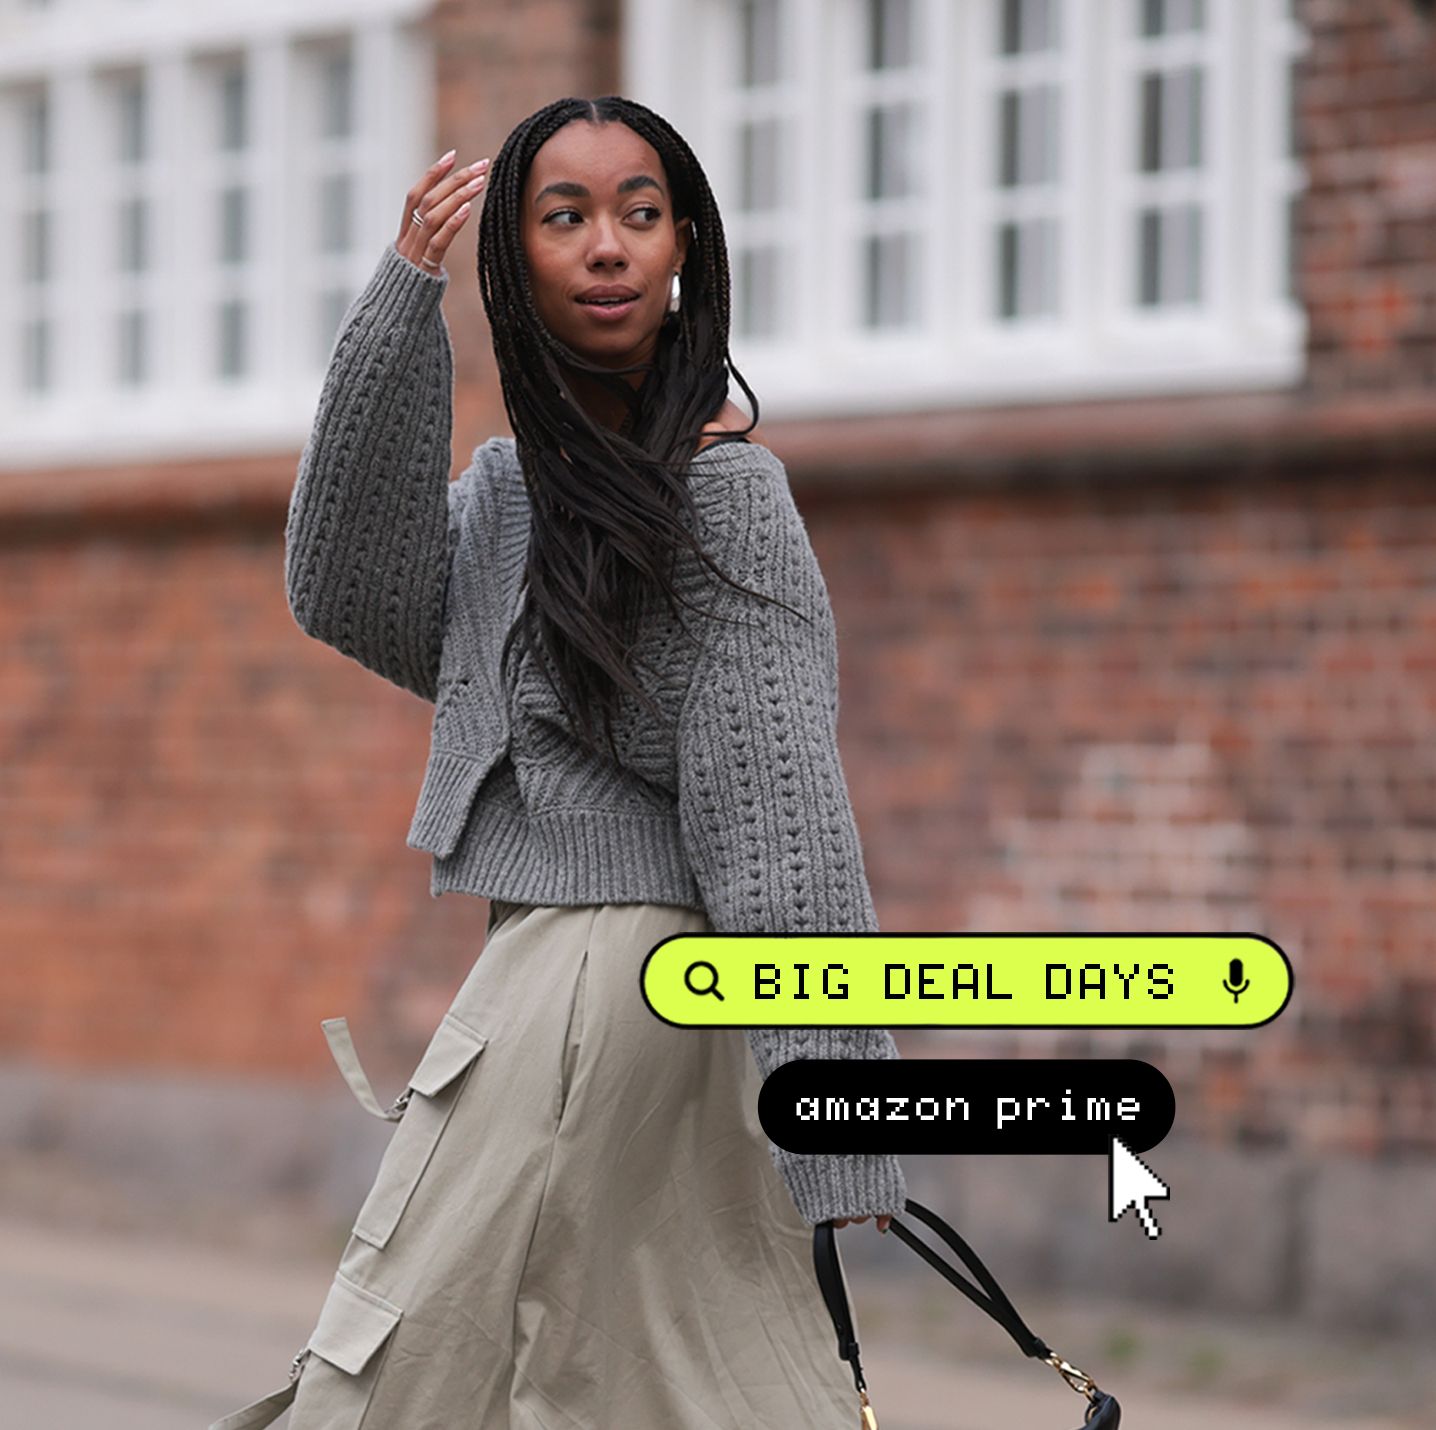 Amazon Prime Day 2.0 Is Still Days Away, but These Fashion Deals Are Already Live